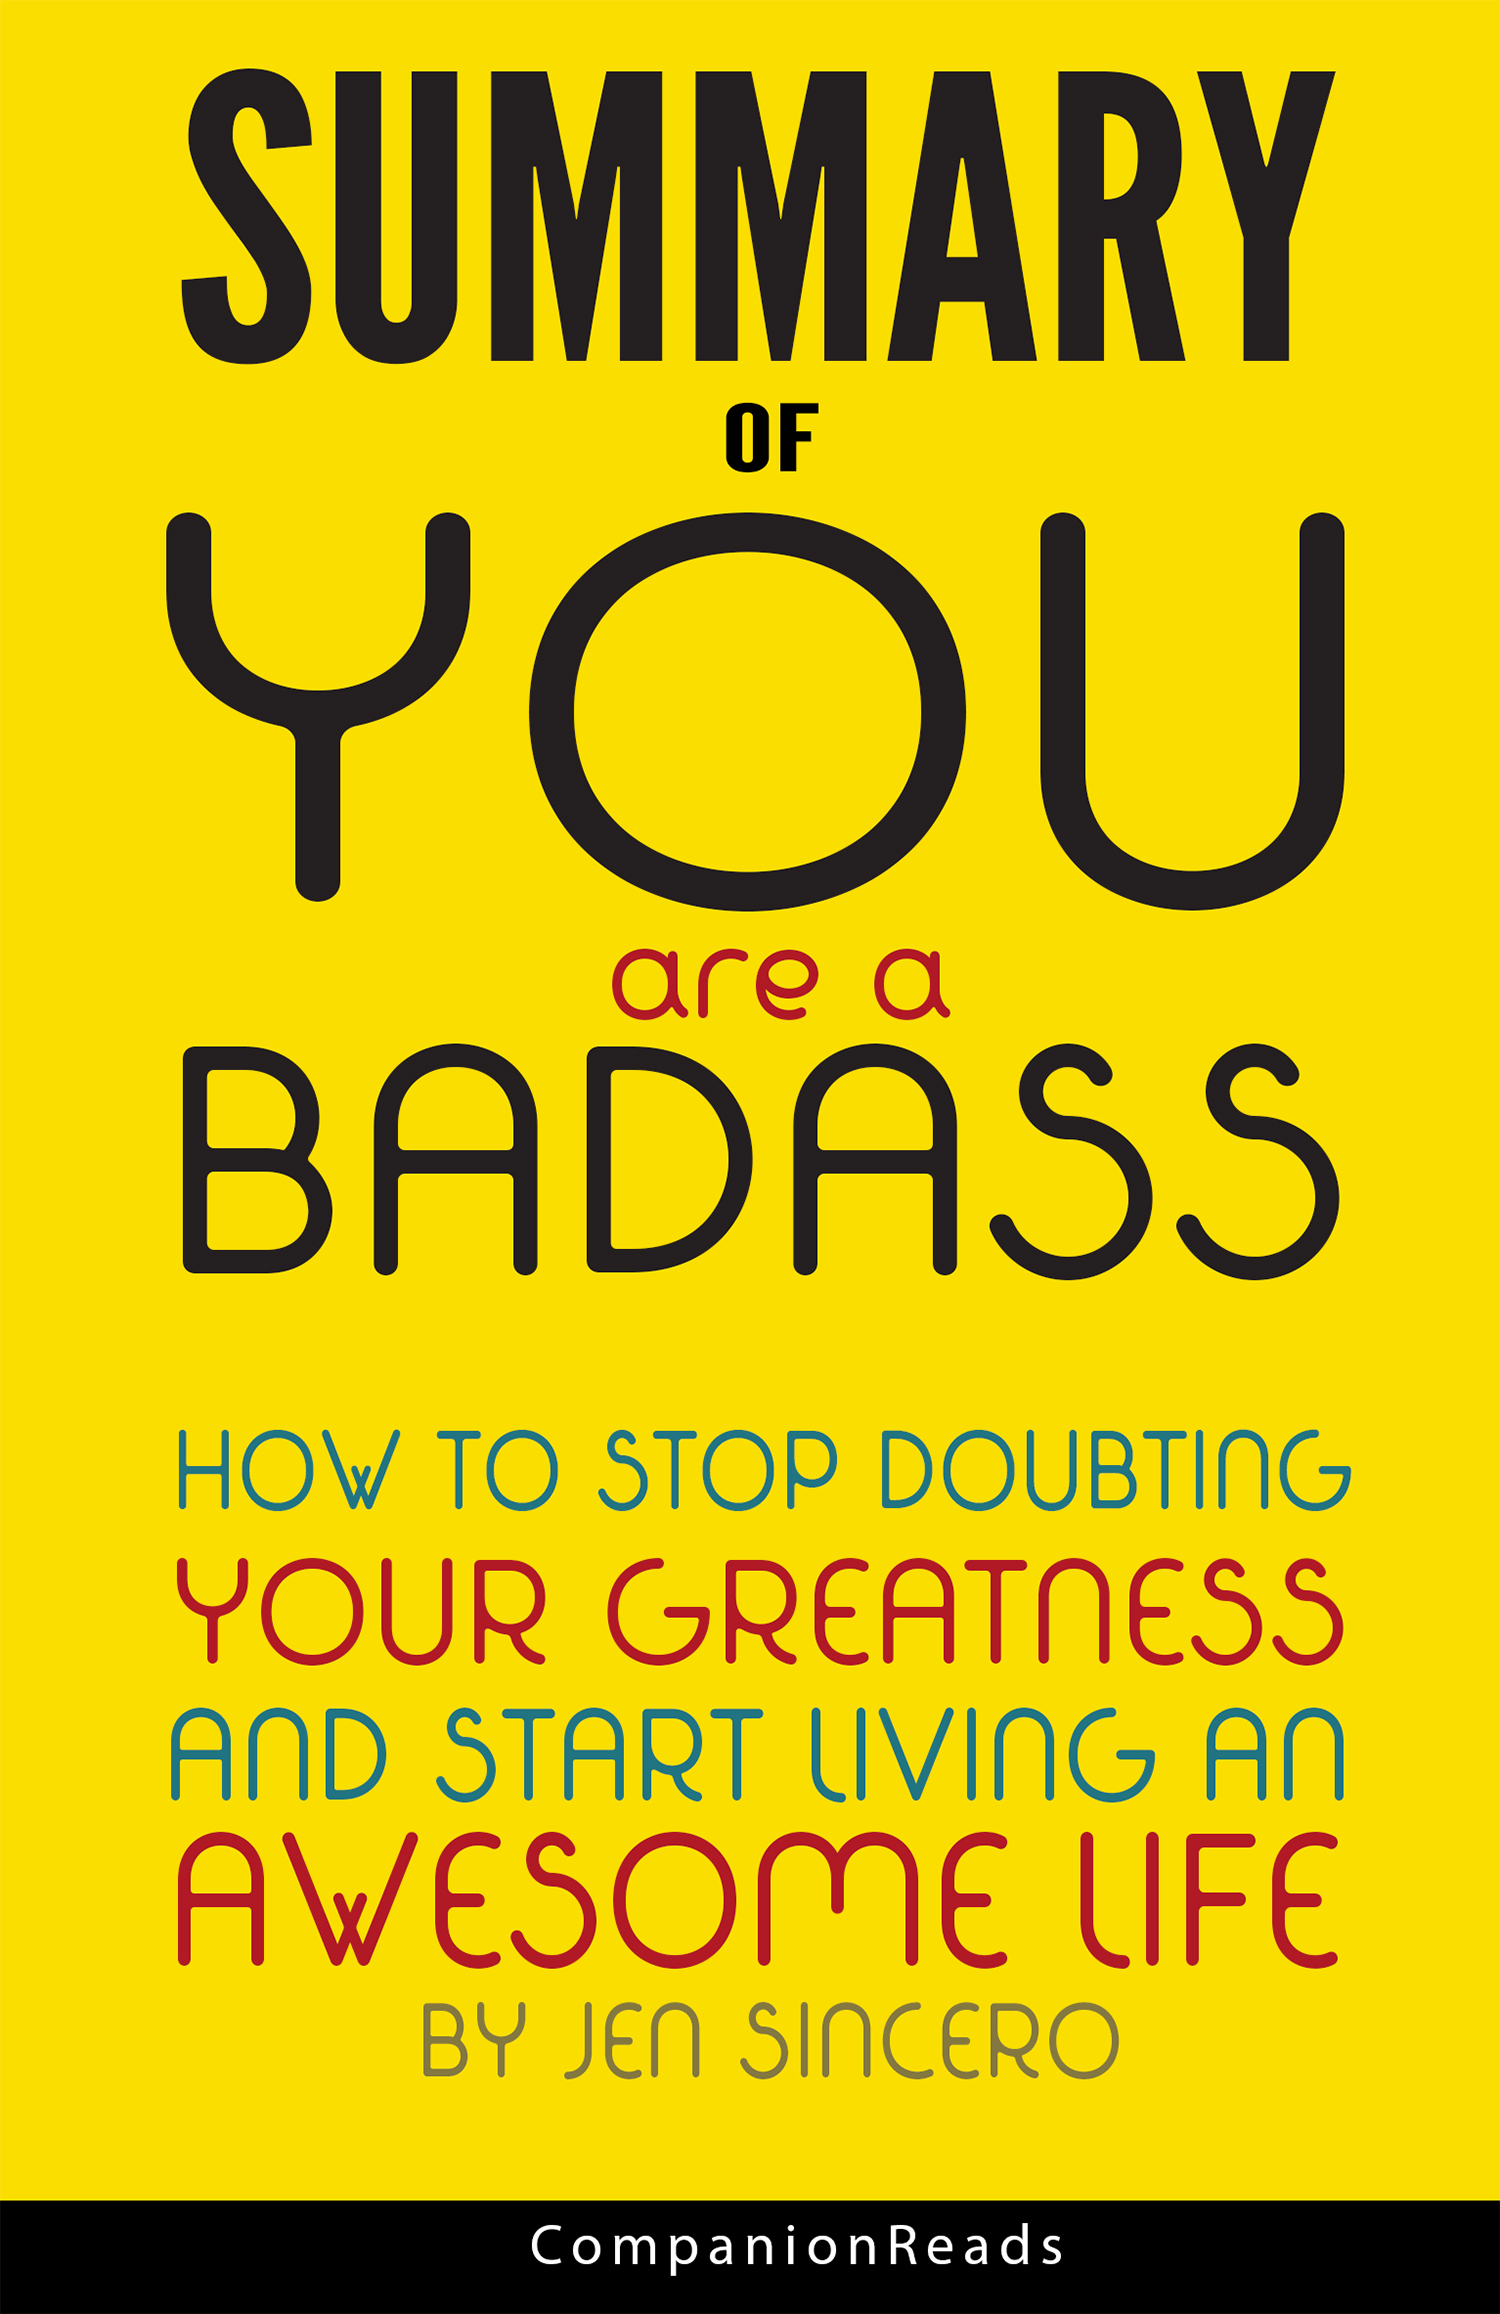 FREE: Summary of You are a Badass: An Analysis of Jen Sincero’s Book by CompanionReads Summary